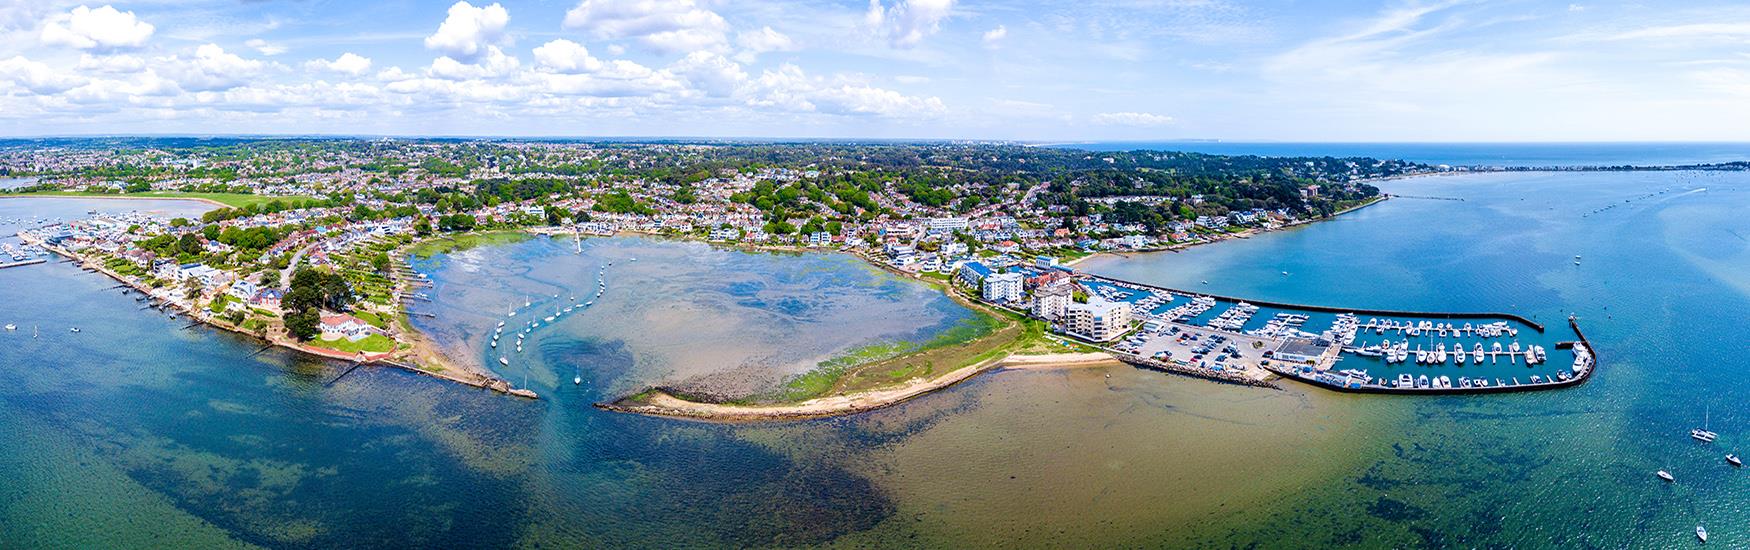 Aerial view of Poole harbour and marina with the blue hue of the sea enhancing the image